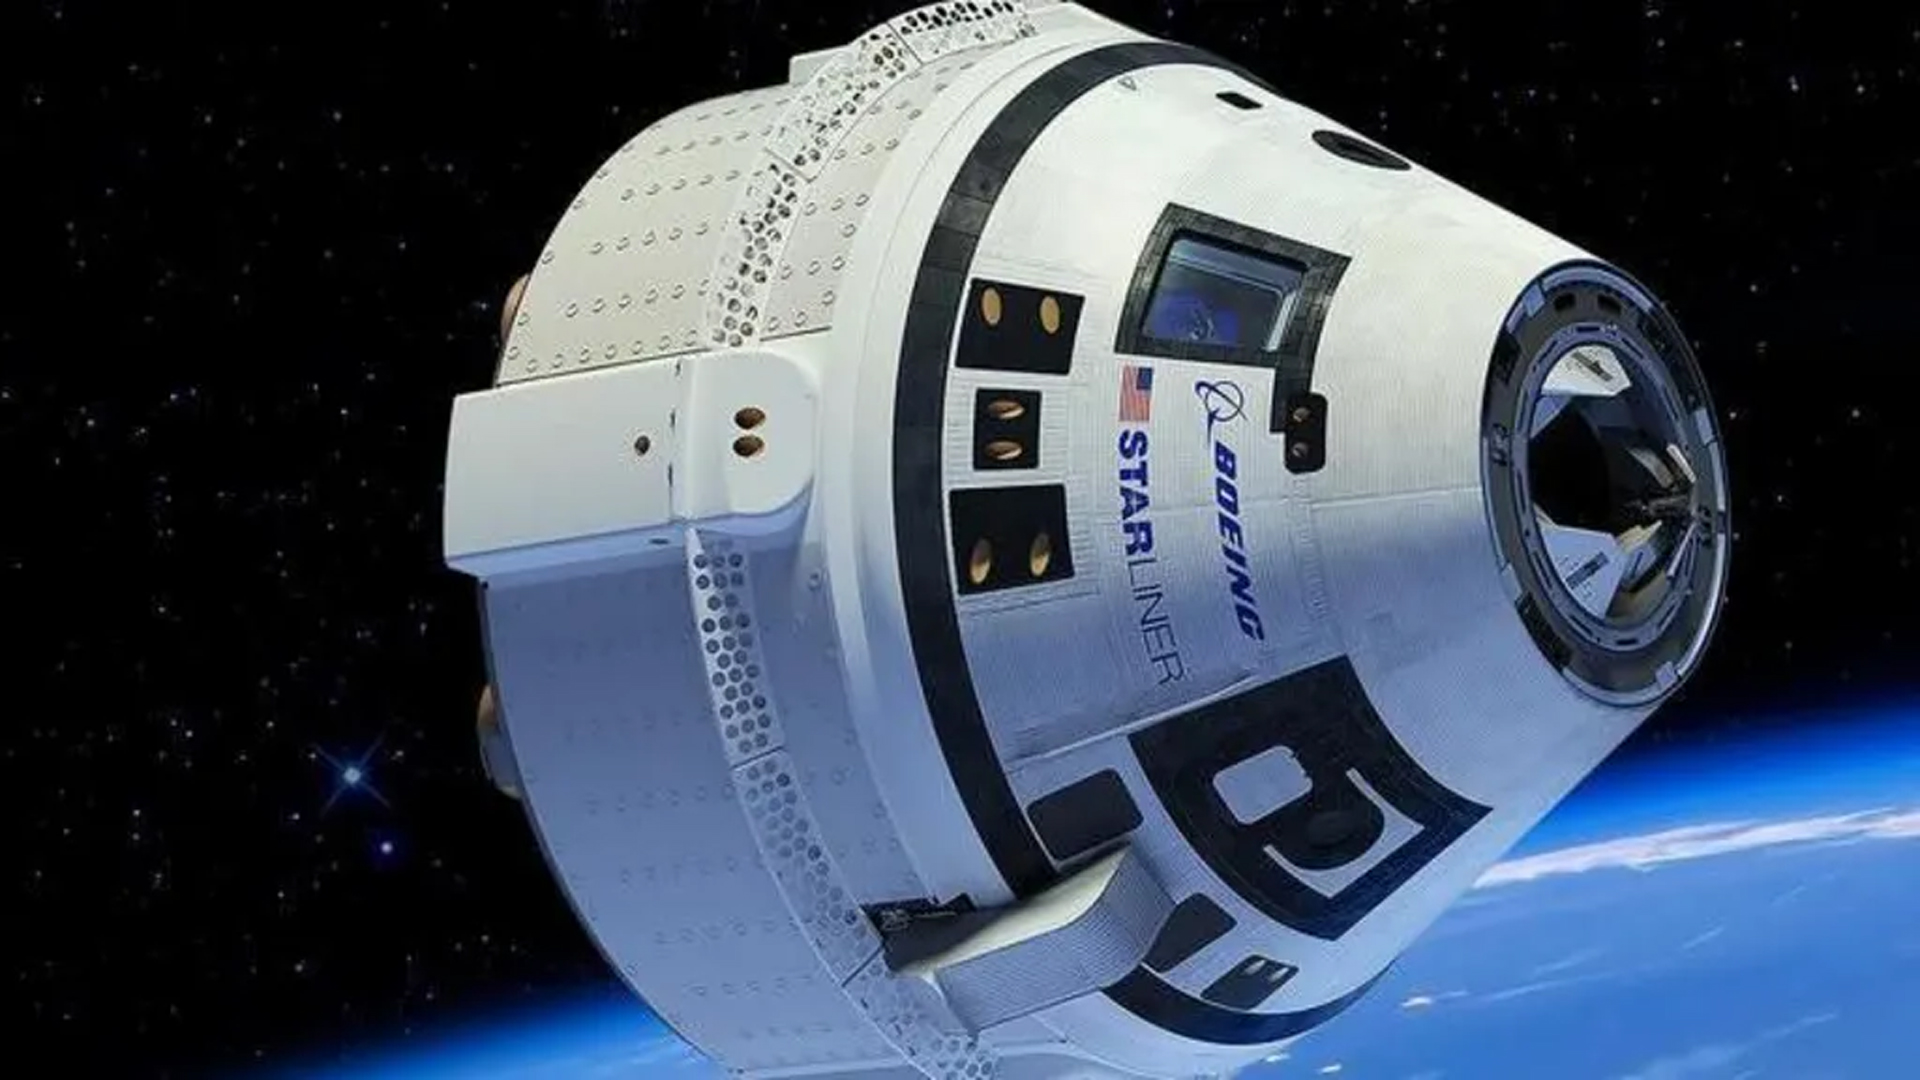 Boeing Starliner Finally Ready For Its First Piloted Flight